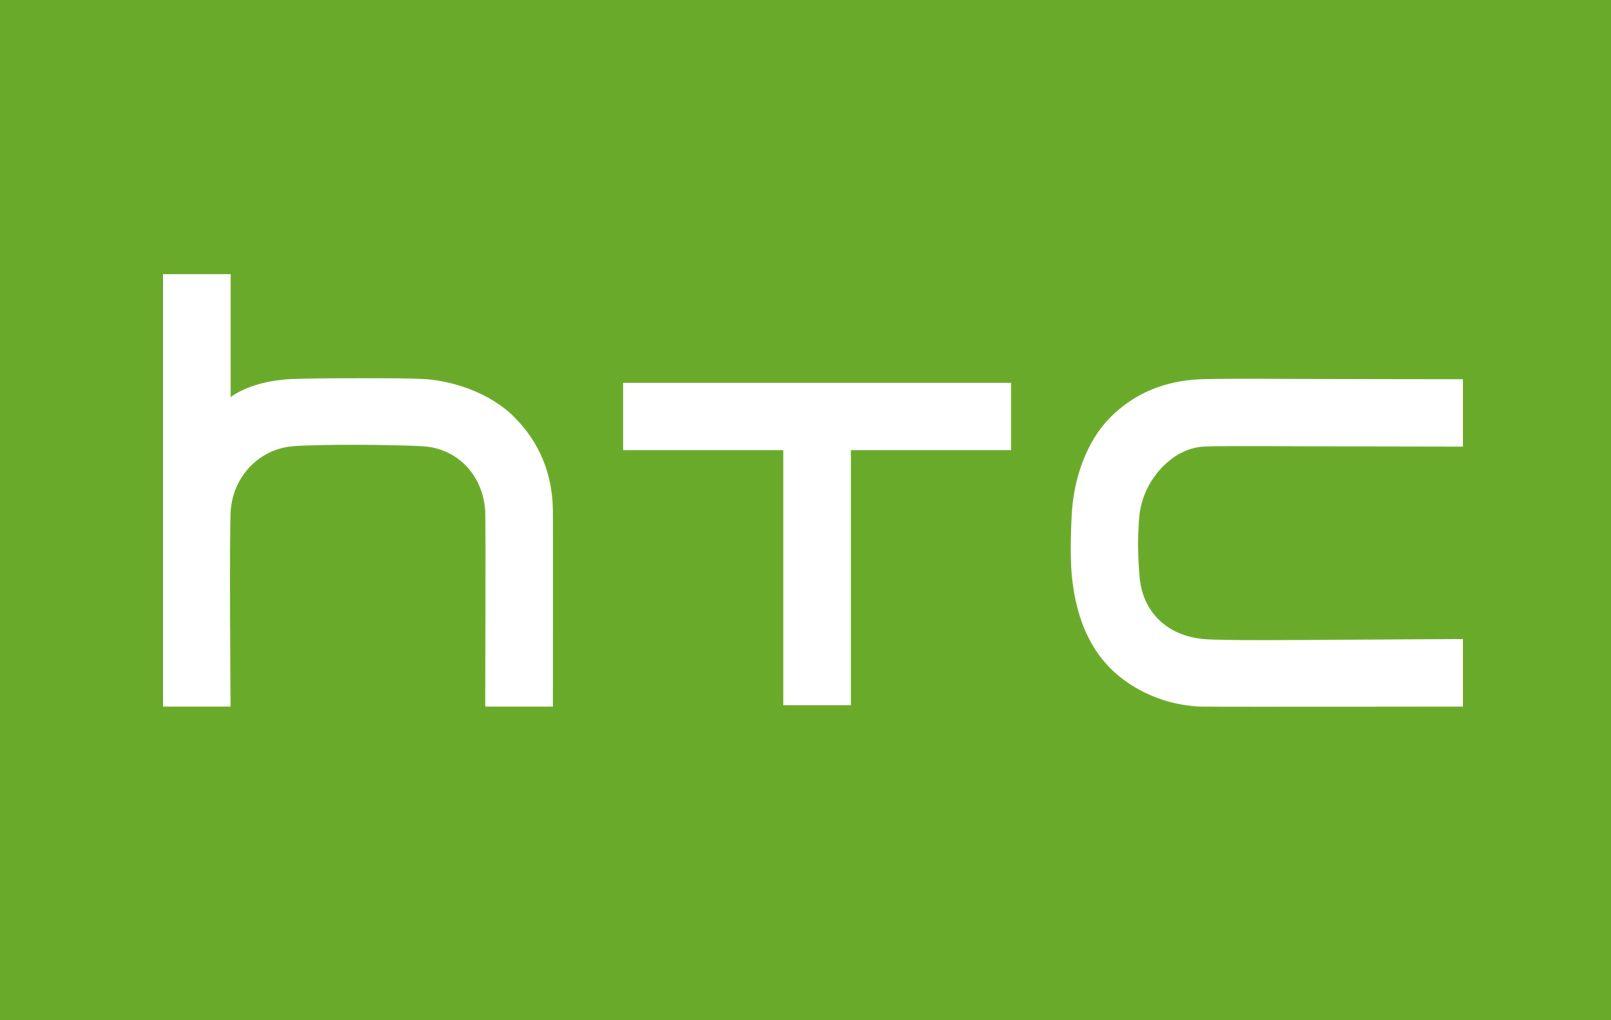 Vive HTC Logo - HTC Makes Statement About The Reported Vive VR Headset Sales Decline ...